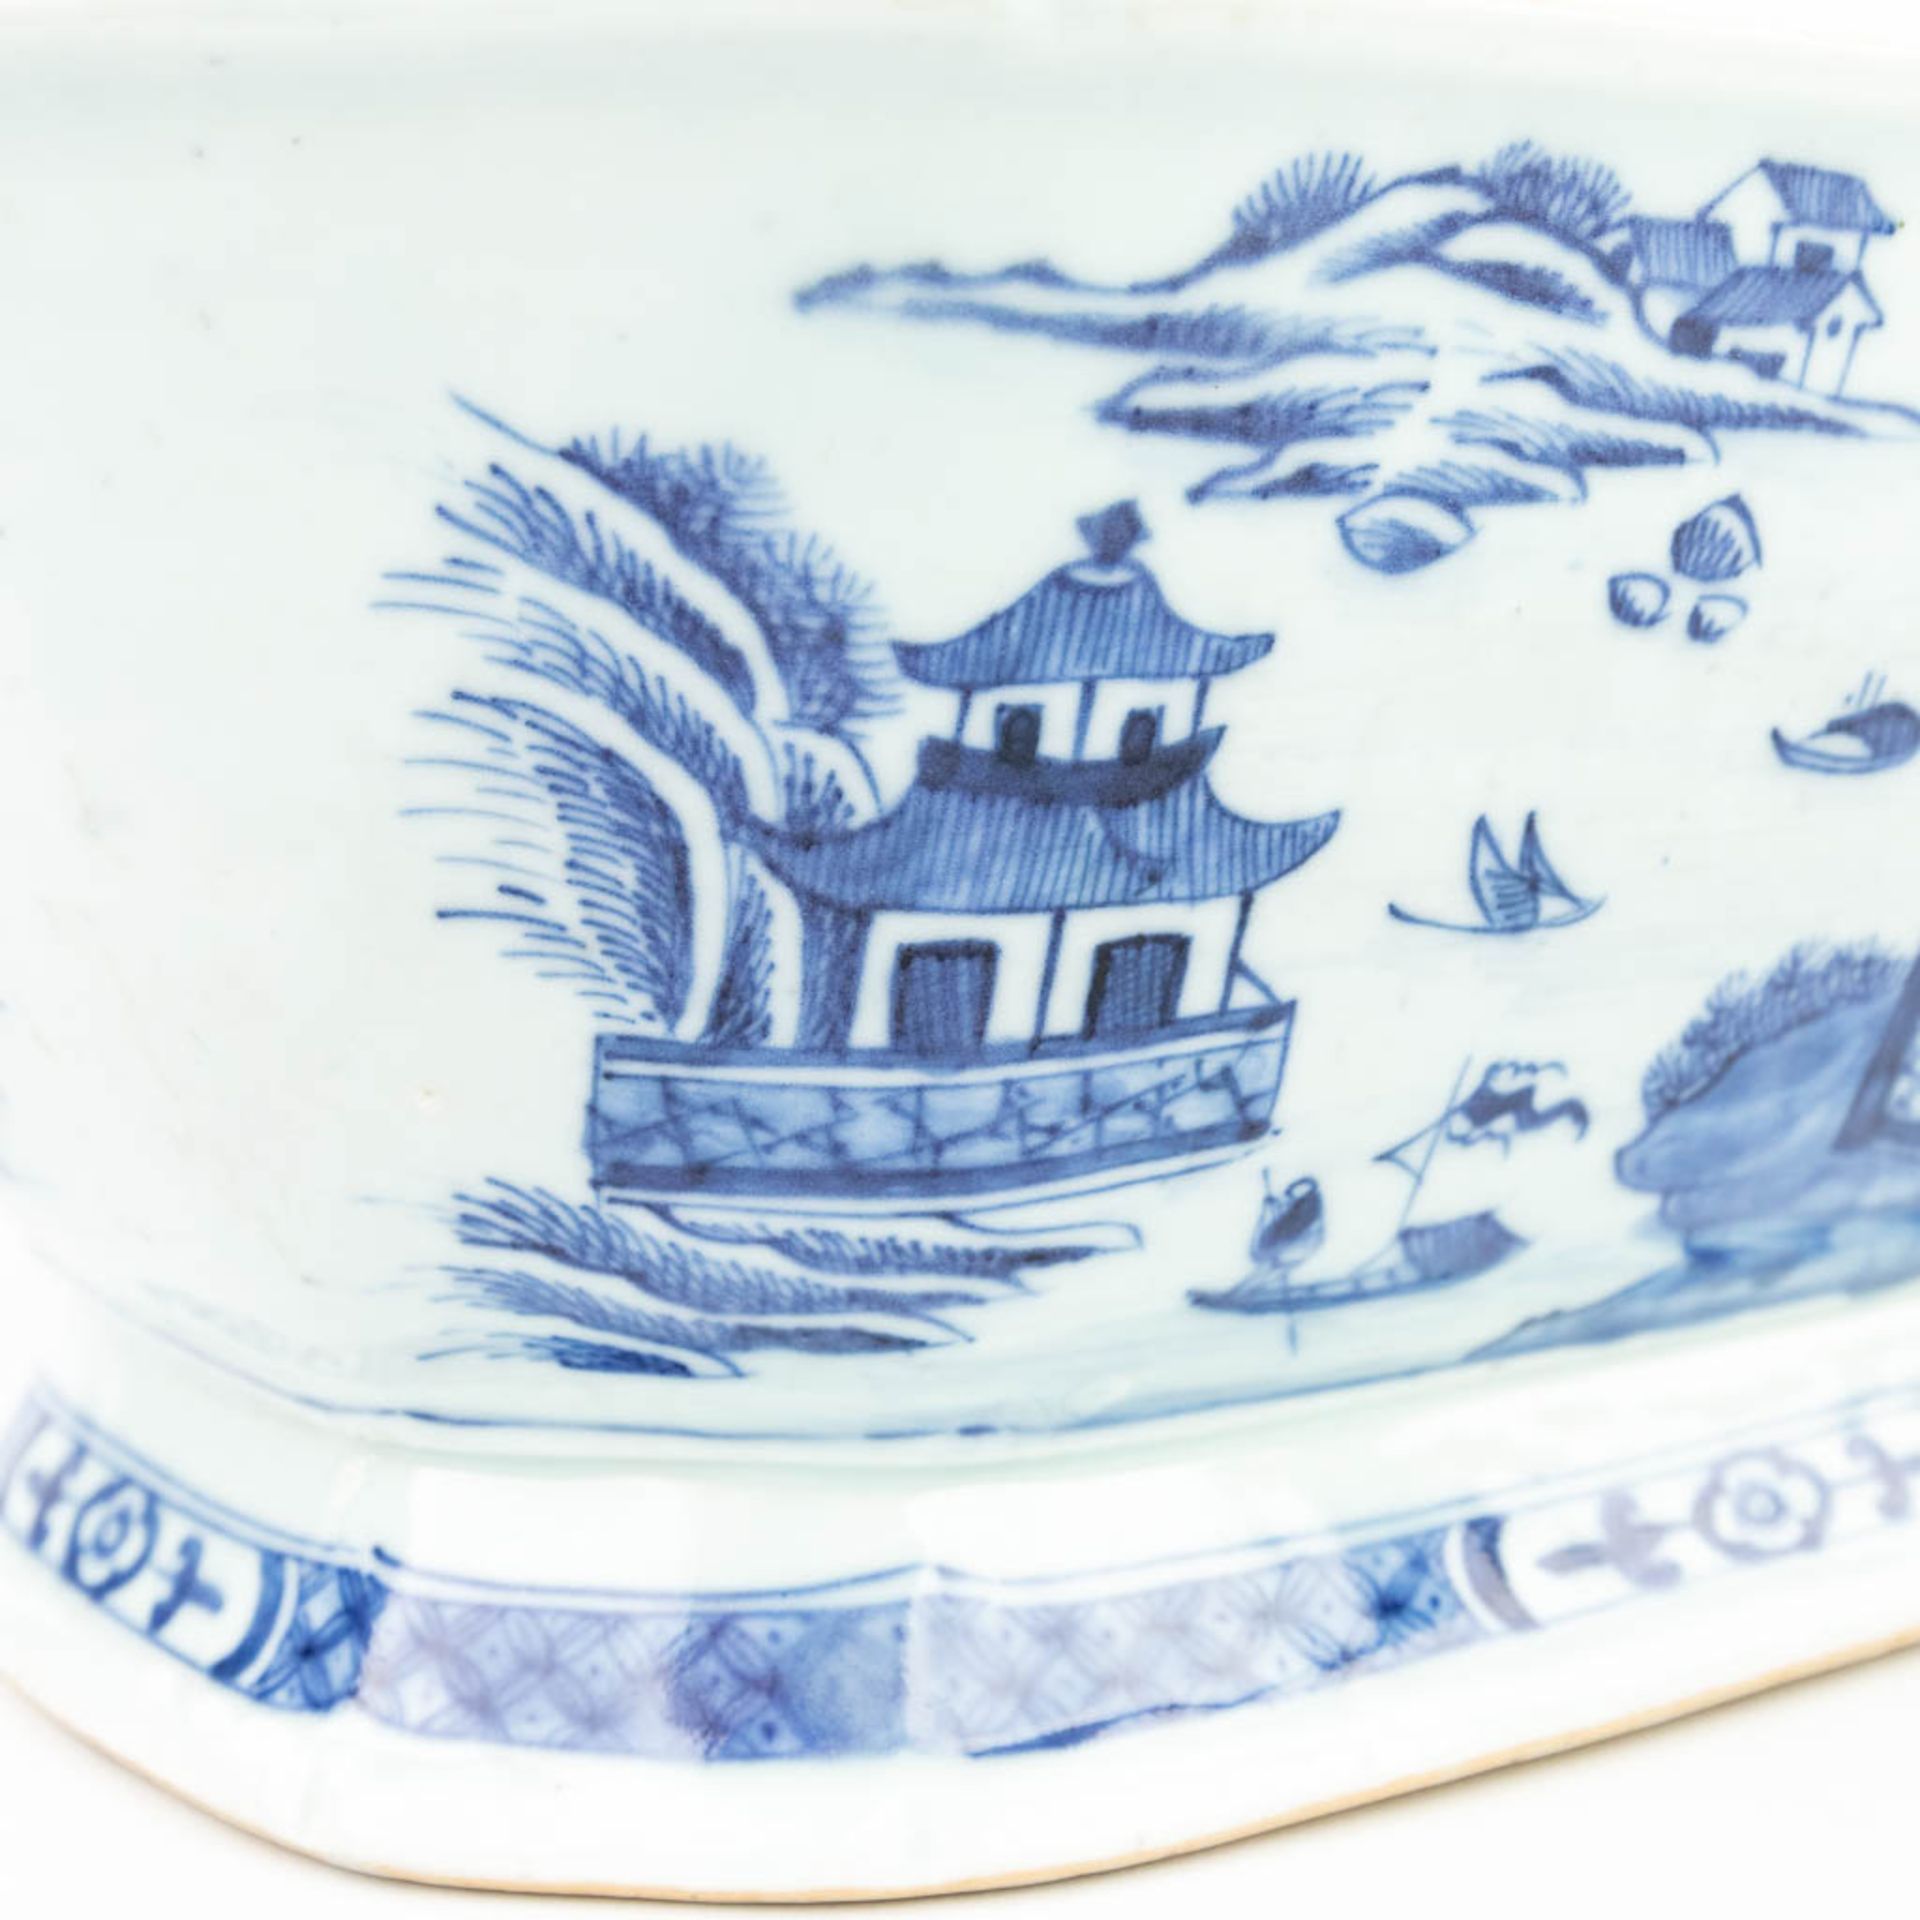 A Chinese soup tureen made of blue-white porcelain. (22 x 31 x 22 cm) - Image 10 of 15